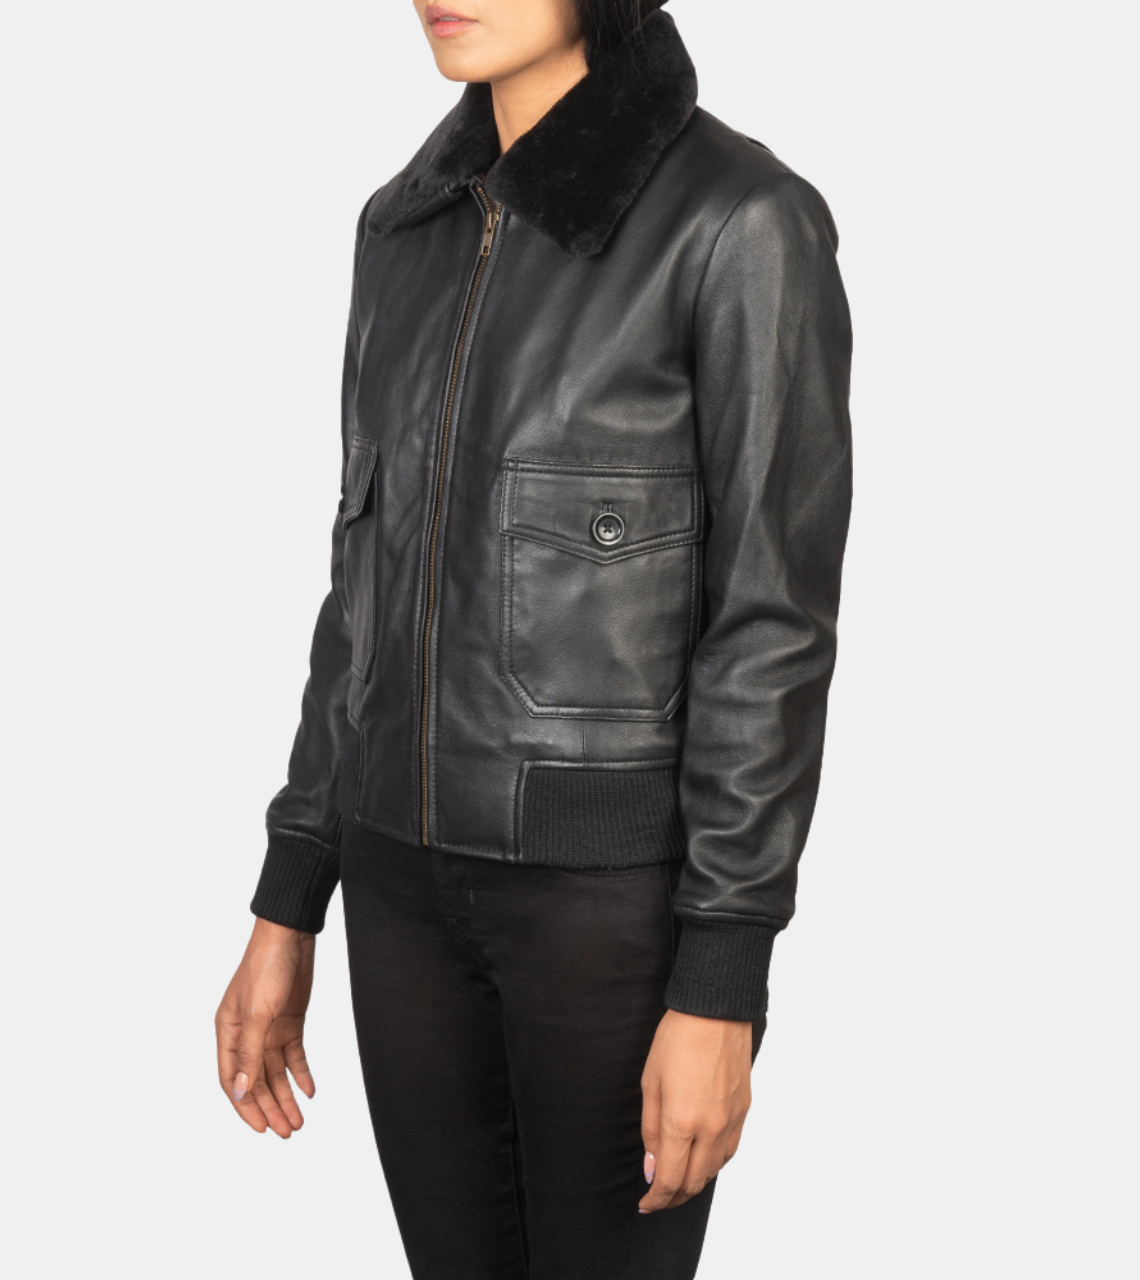 Winifred Black Shearling Leather Jacket For Women's